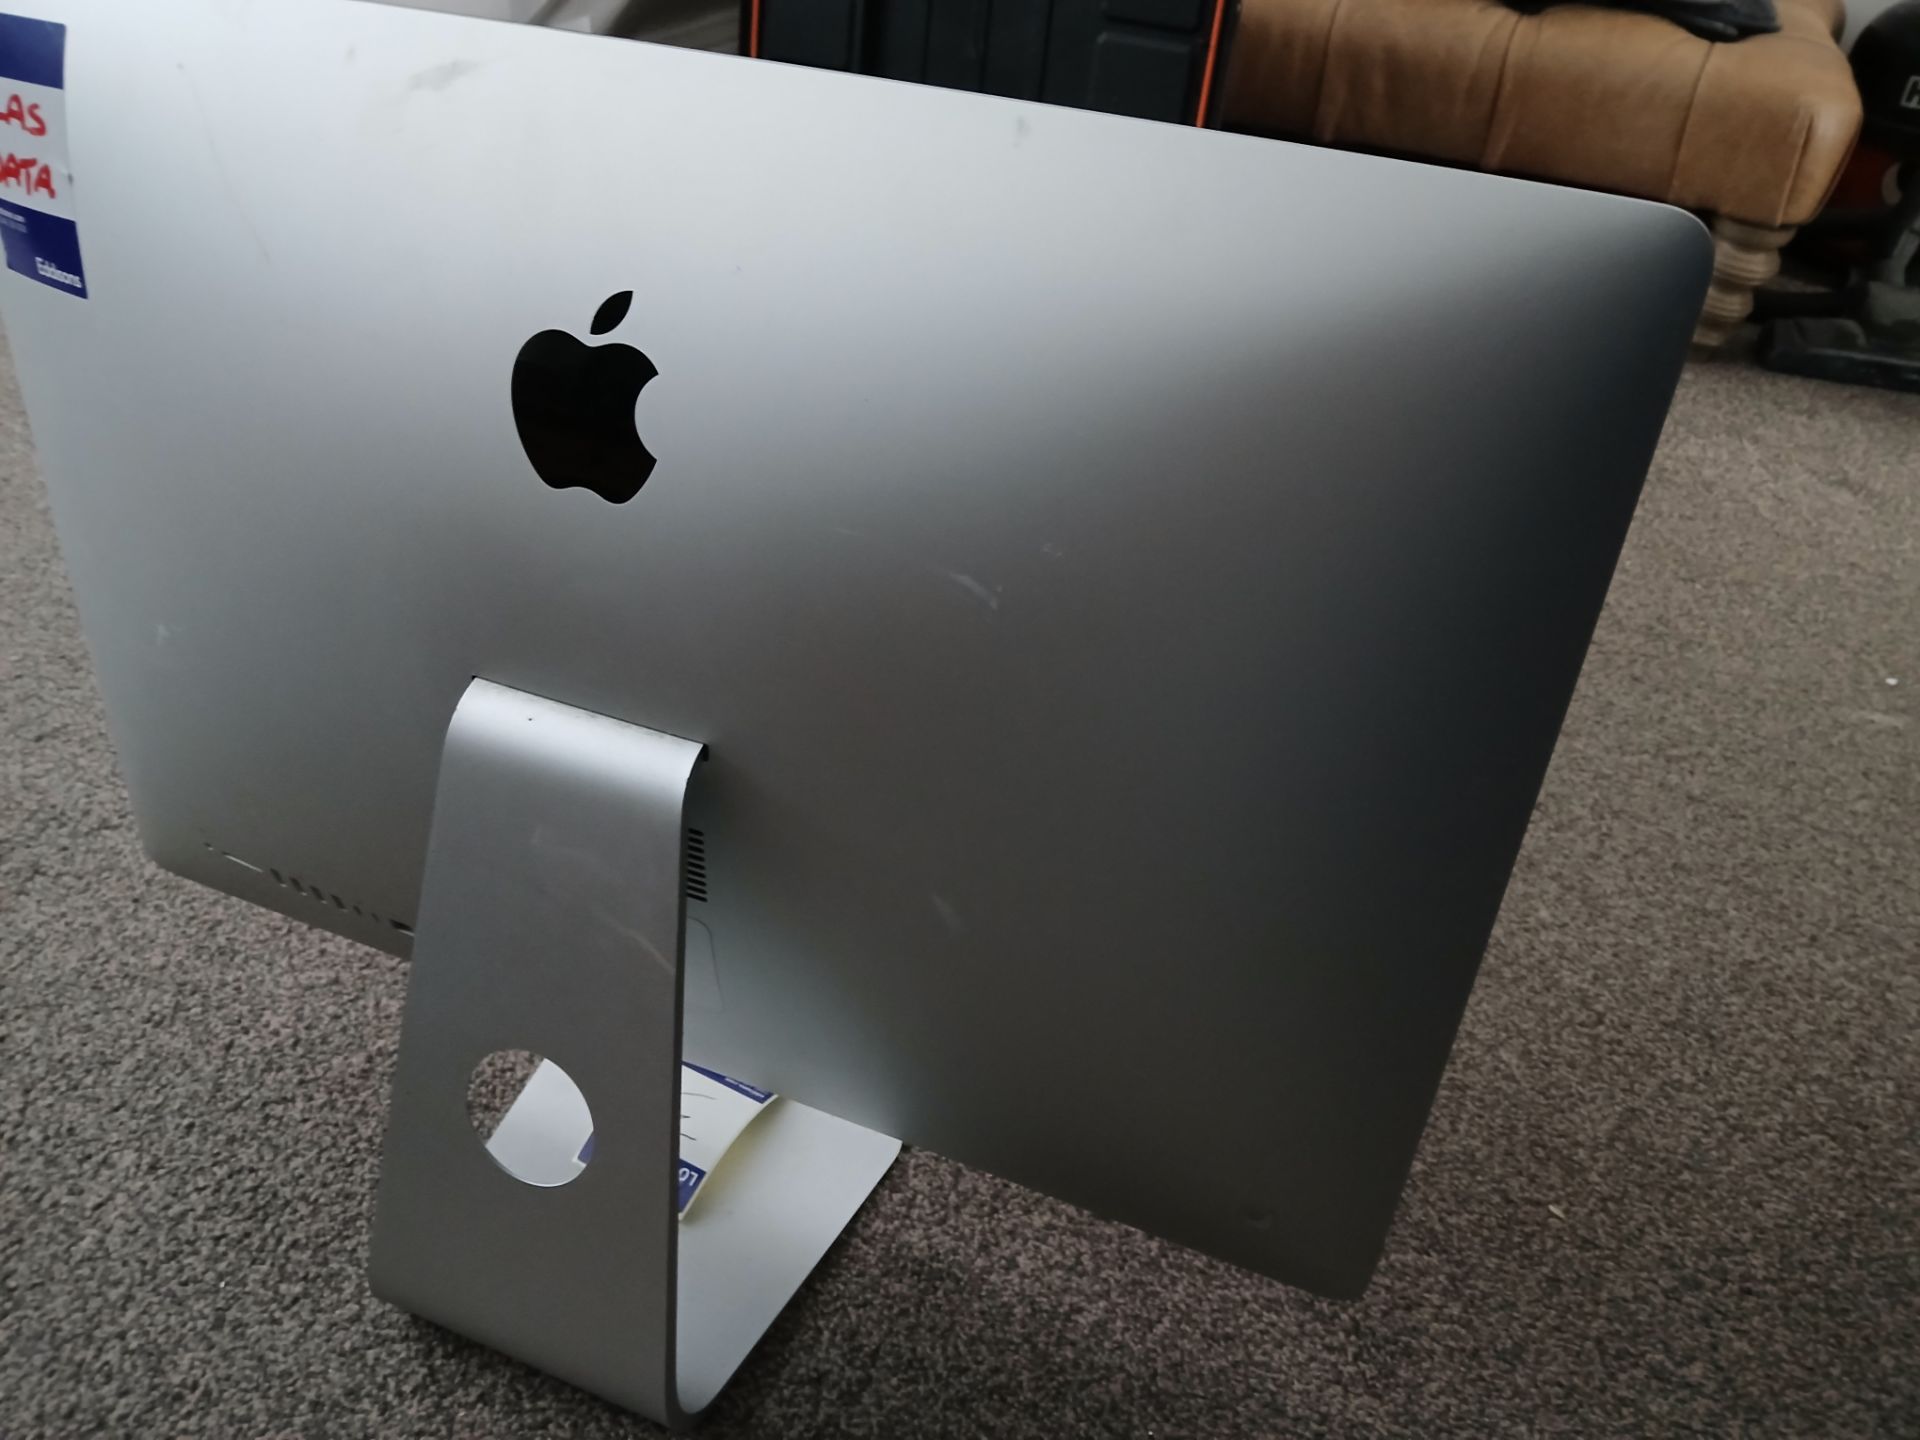 Apple iMac (Retina 5K, 27”, 2017), Serial Number C02YD0AQJ1GP (iMac only, no mouse, keyboard, or - Image 5 of 6